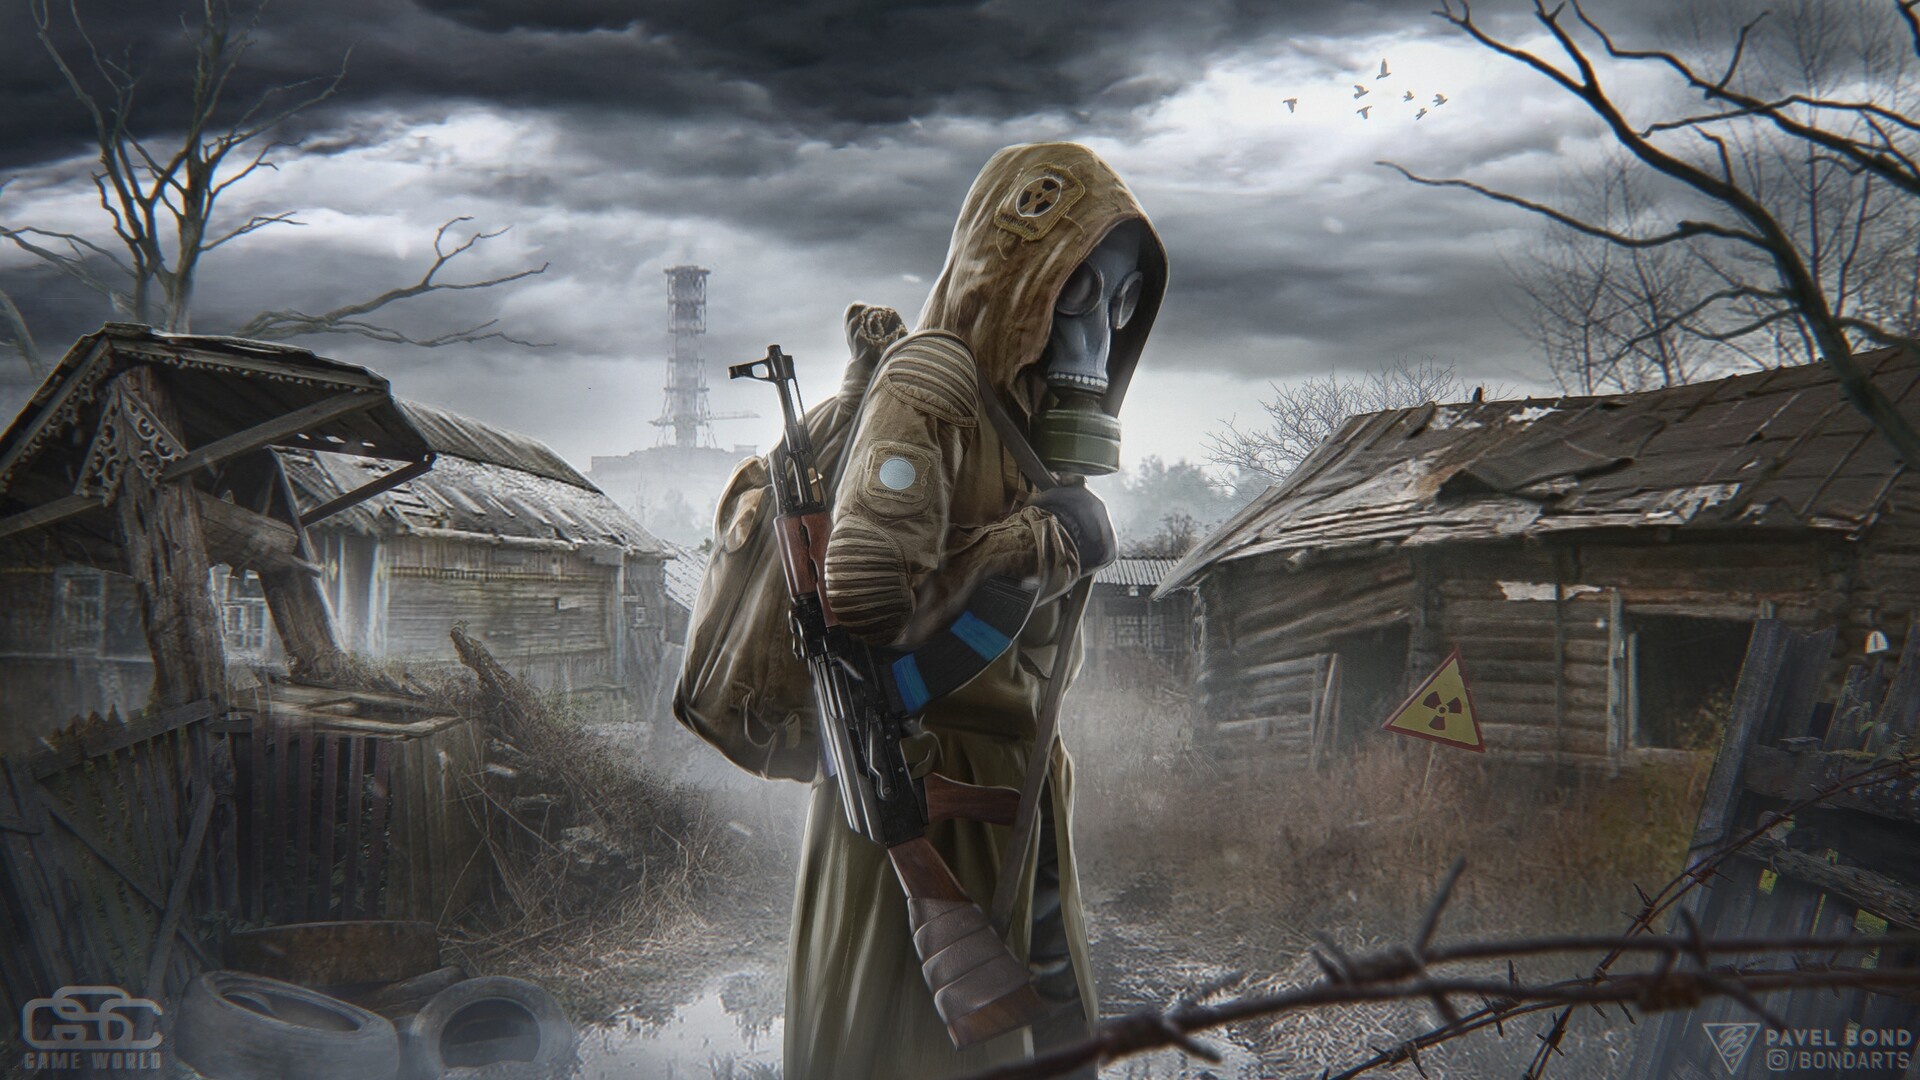 General 1920x1080 S.T.A.L.K.E.R. video games apocalyptic video game art artwork